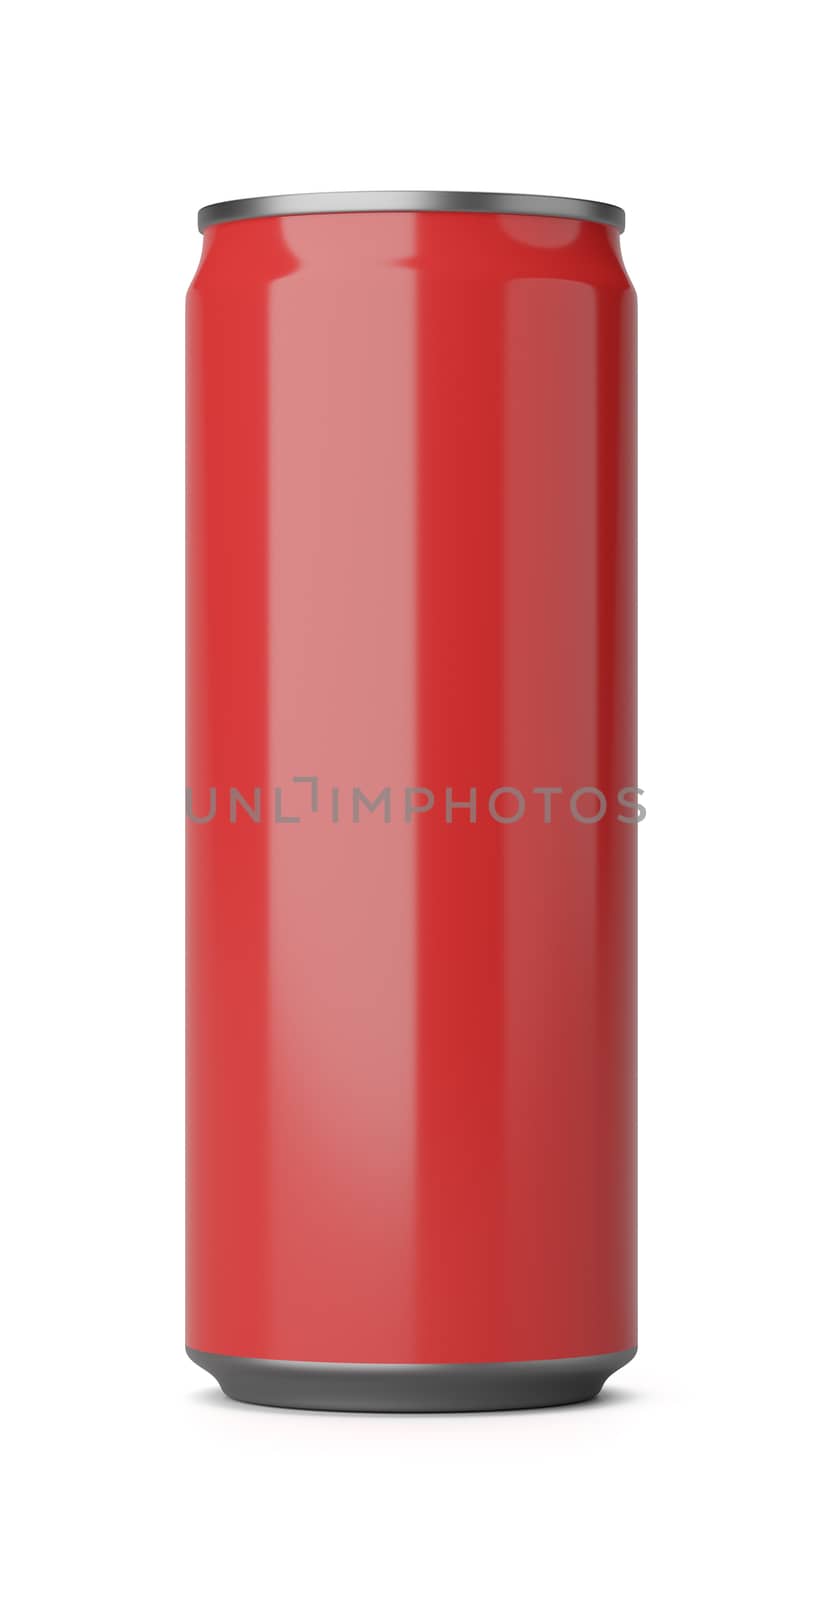 One Red Drink Can Isolated on White Background 3D Illustration